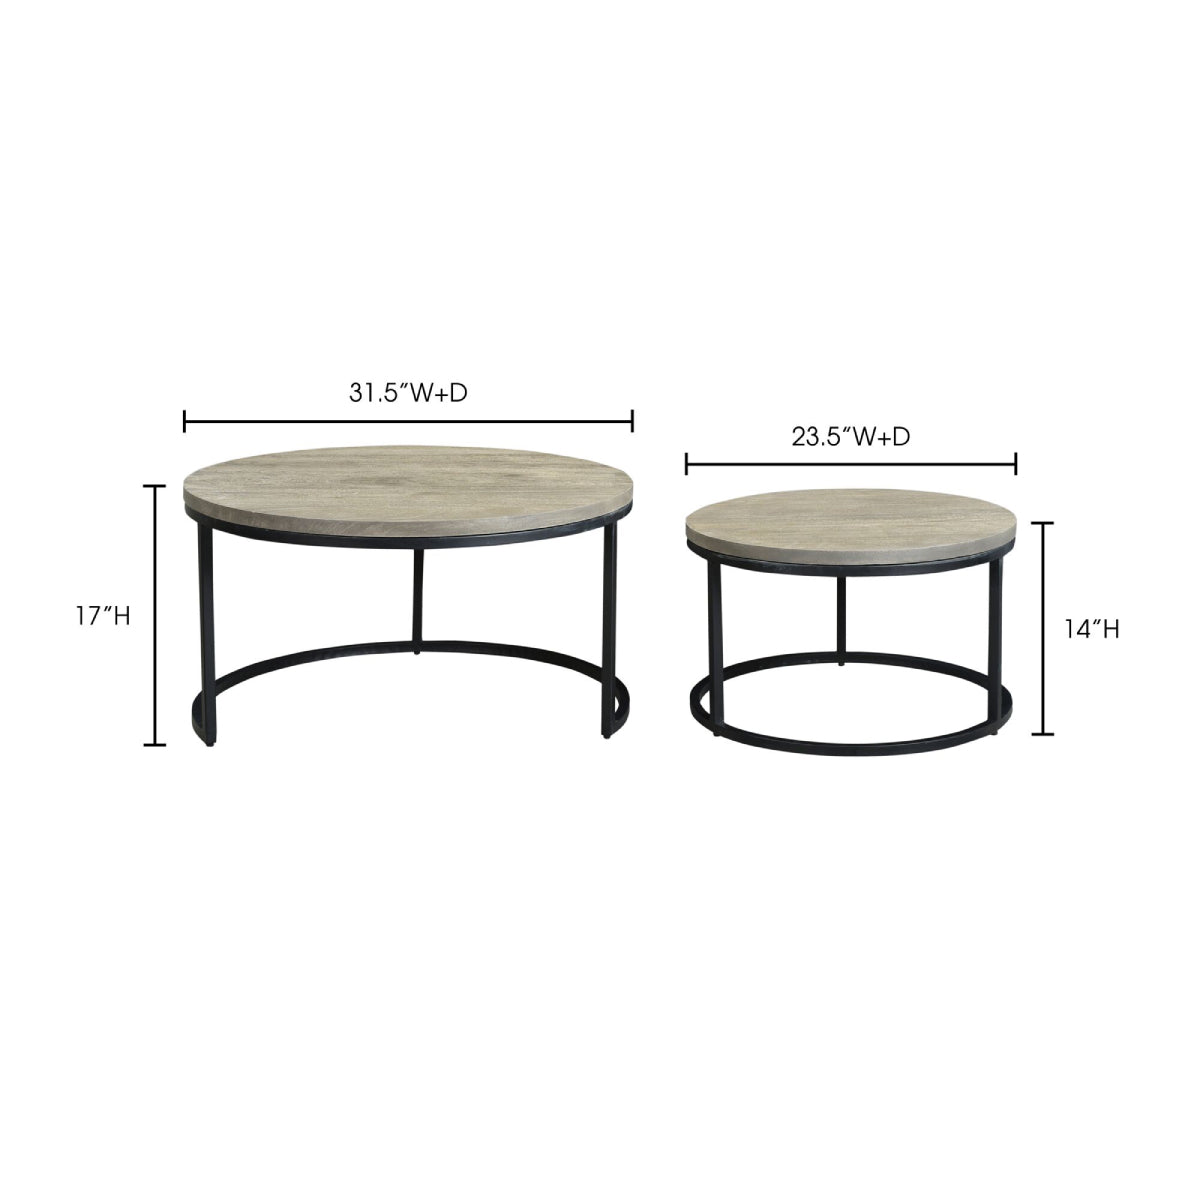 Load image into Gallery viewer, Drey Round Nesting Coffee Tables Set of 2 Coffee Tables Moe&amp;#39;s     Four Hands, Burke Decor, Mid Century Modern Furniture, Old Bones Furniture Company, Old Bones Co, Modern Mid Century, Designer Furniture, https://www.oldbonesco.com/
